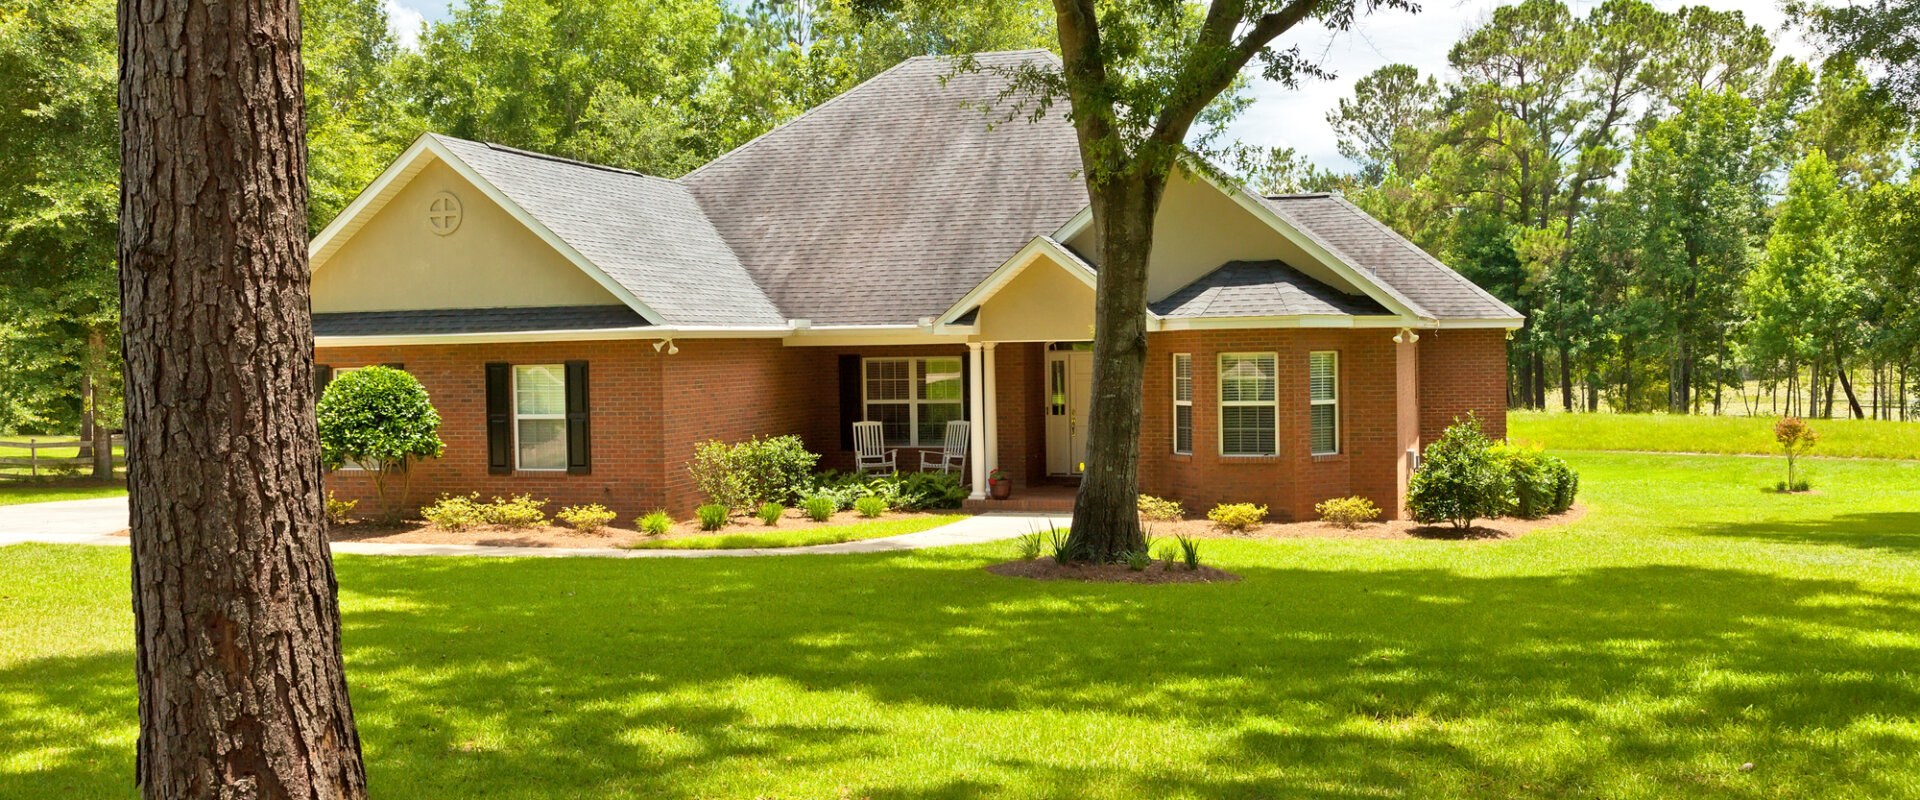 Sell Your House Fast In Greenville, SC